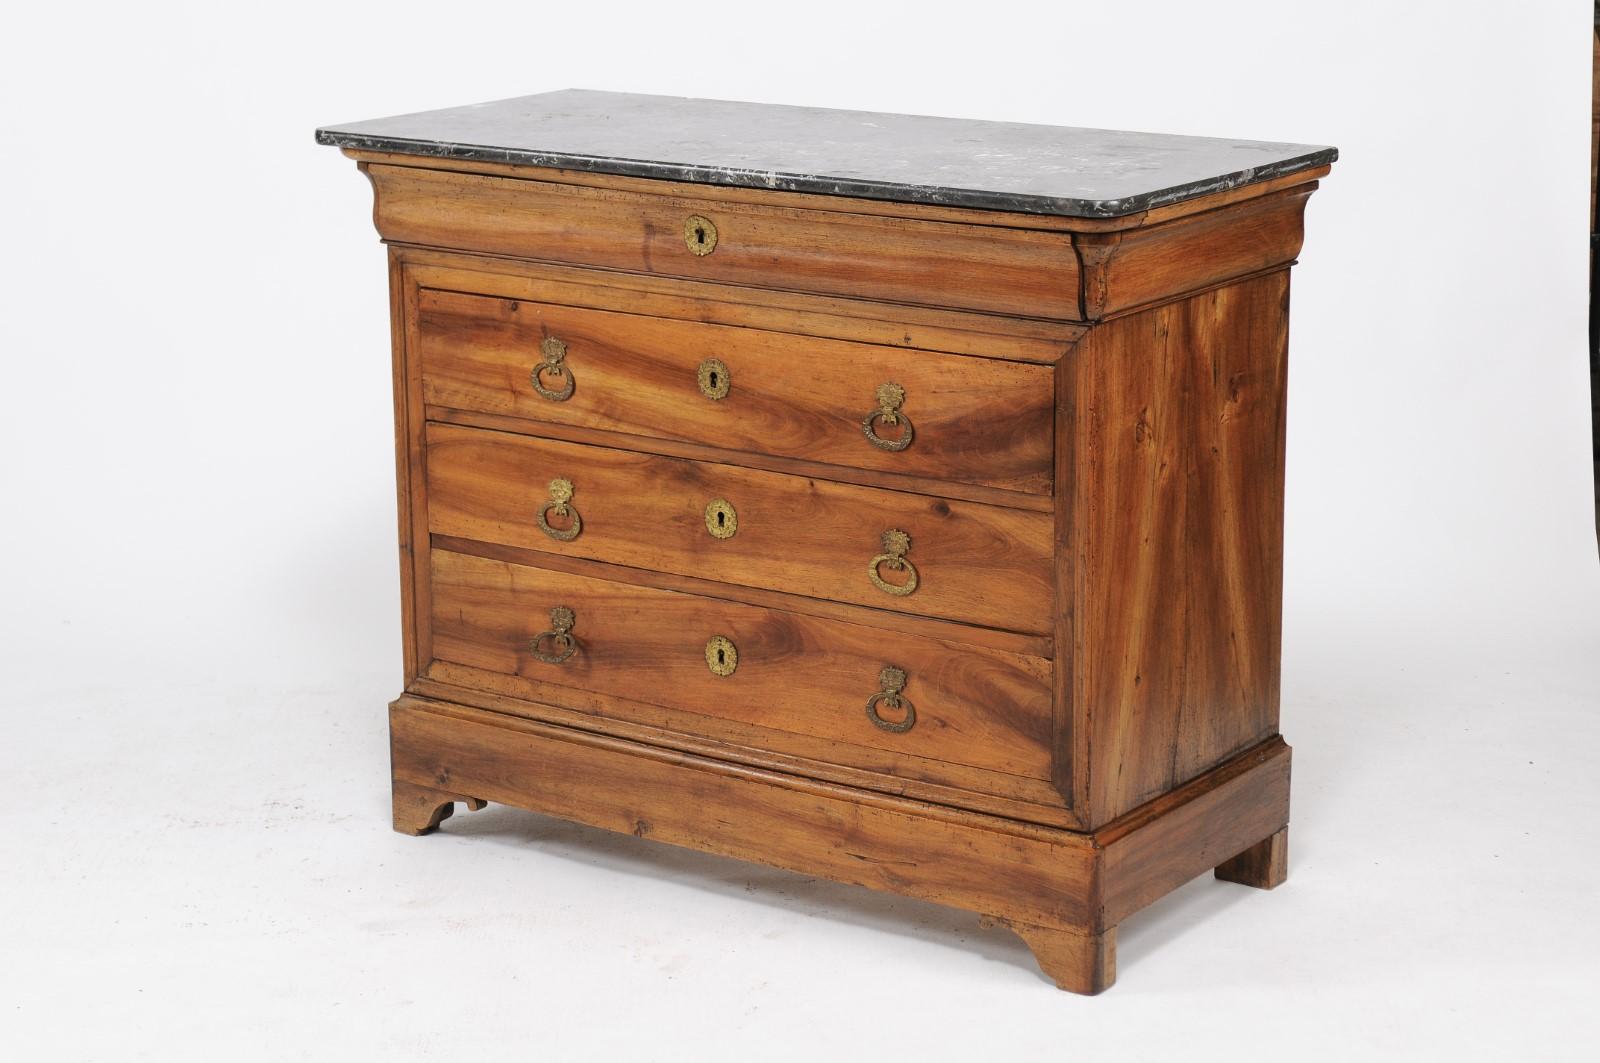 A French Louis-Philippe walnut commode from the late 19th century, with grey marble top and four drawers. Born in France during the later years of the 19th century, this pretty Louis-Philippe commode features a gorgeous veining in the marble top